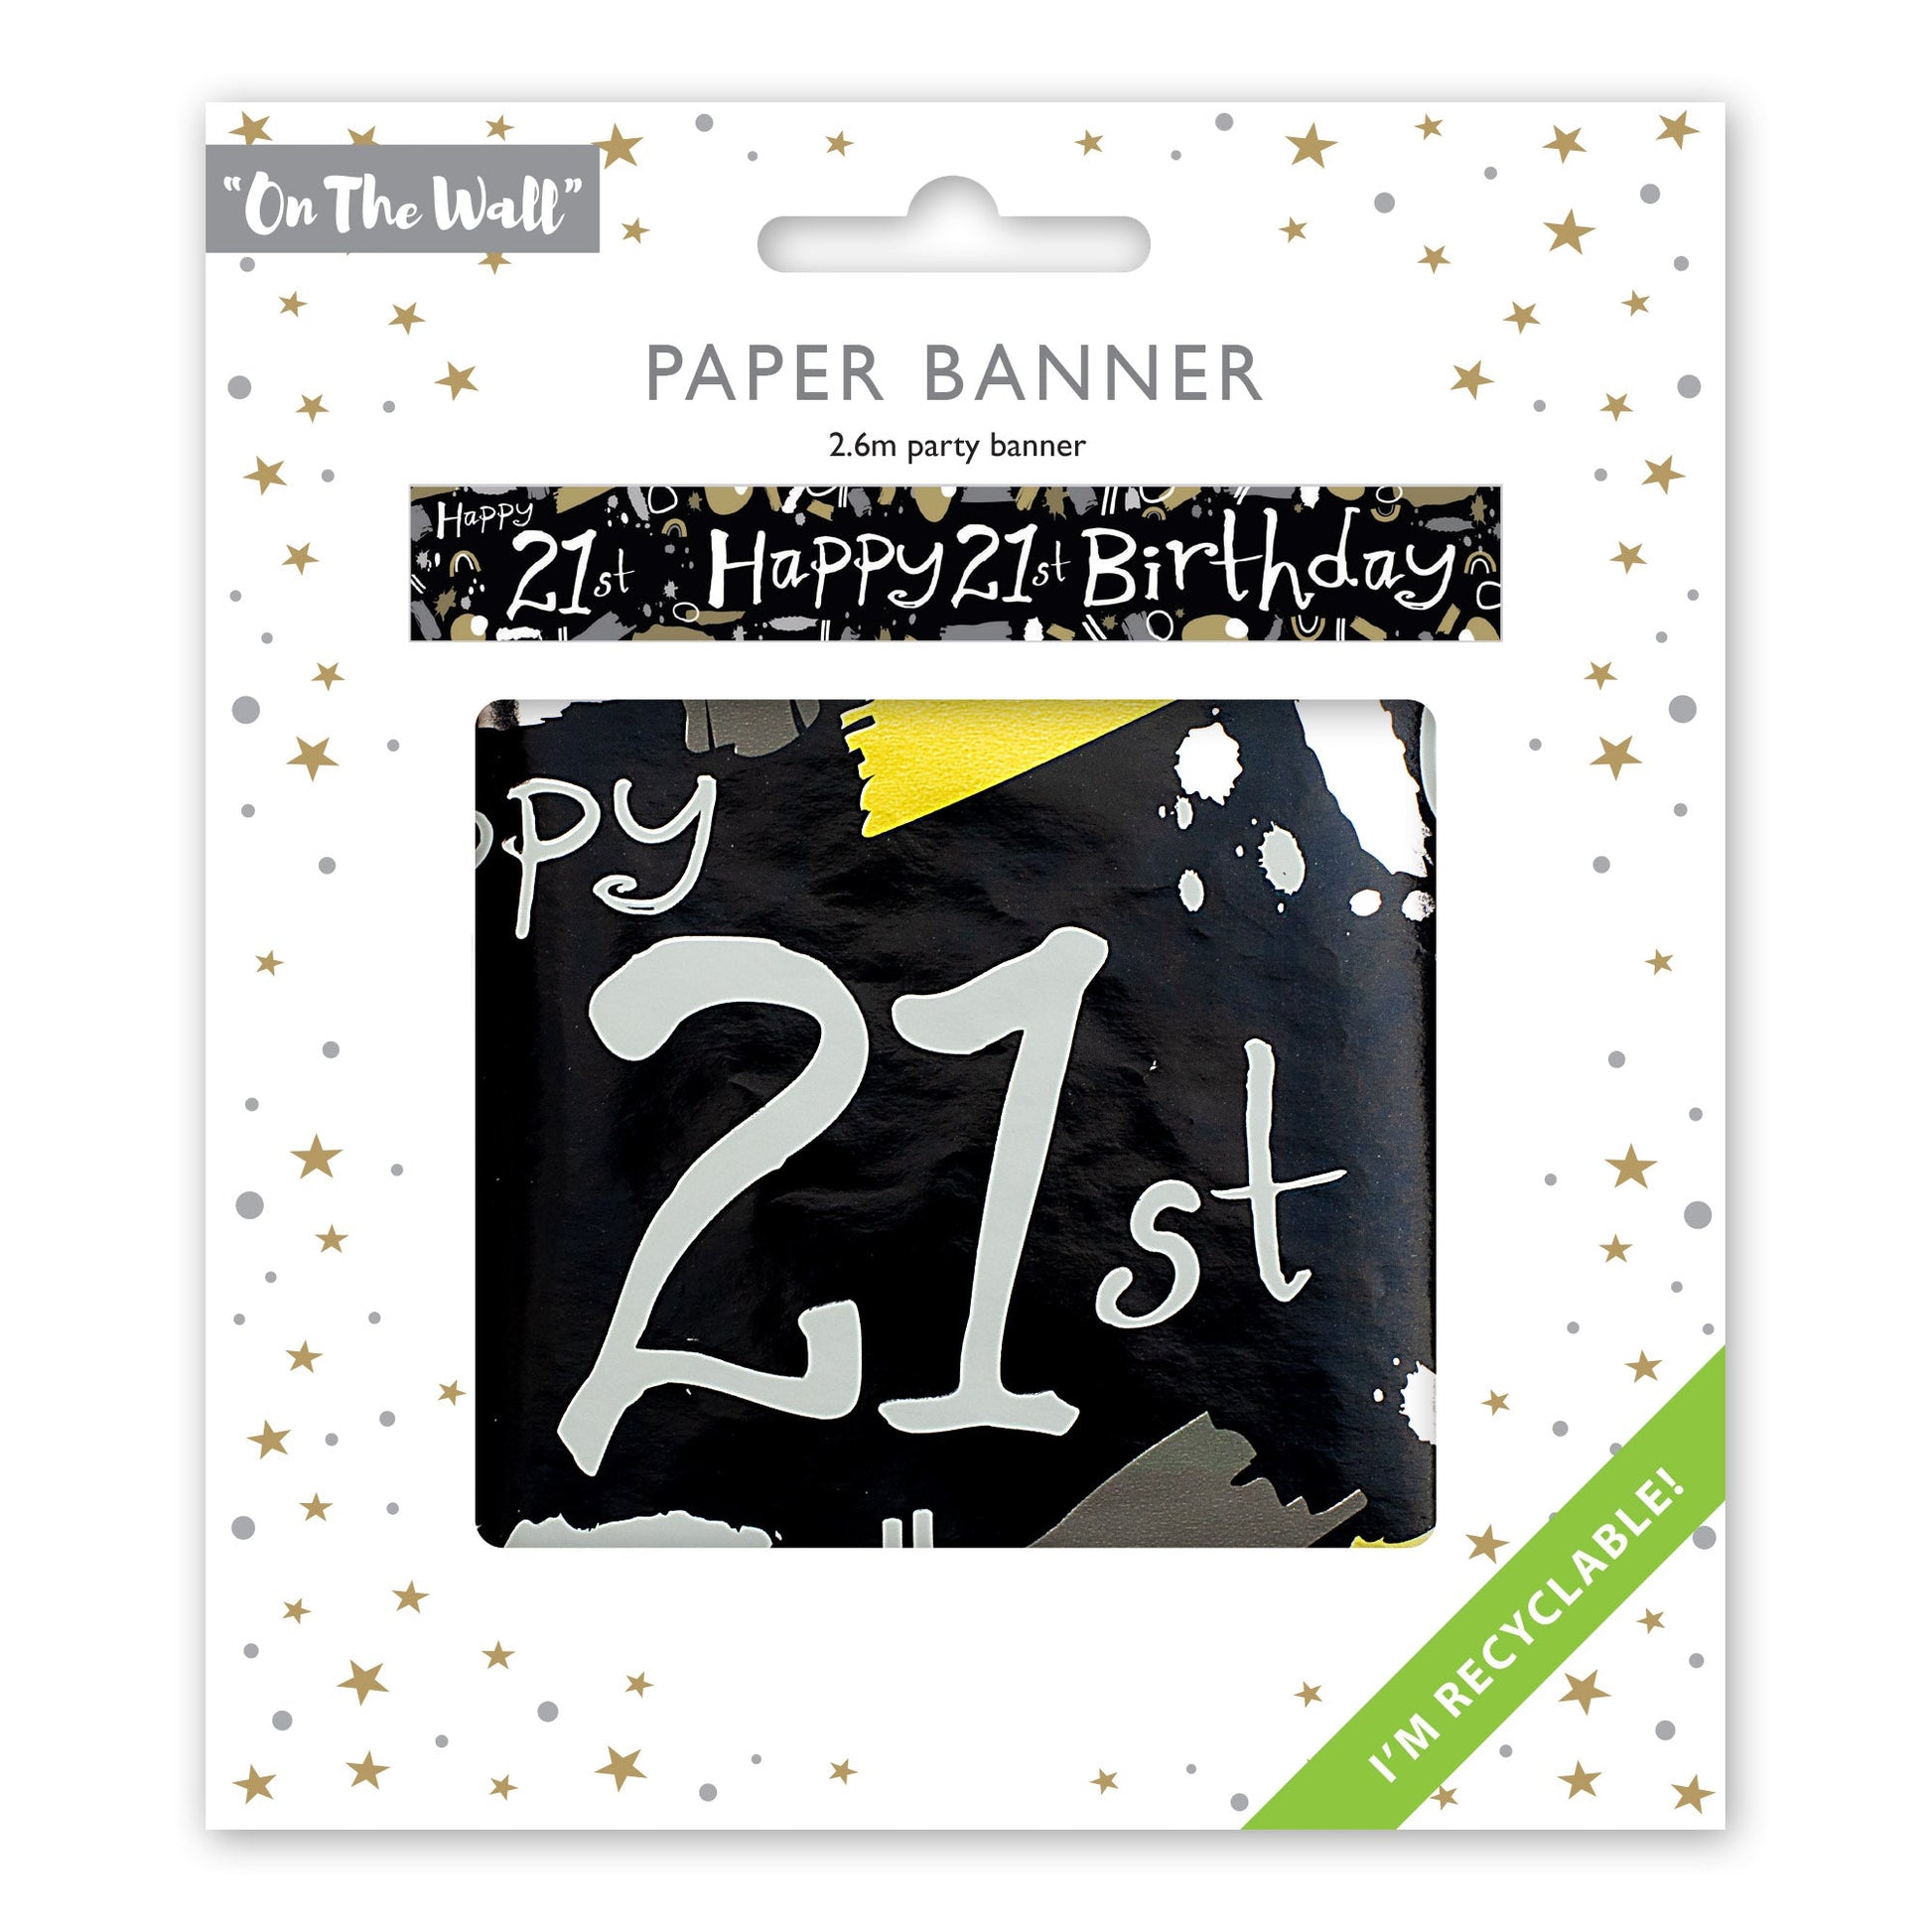 Age 21 Happy Birthday Recyclable Paper Banner in Black & White 2